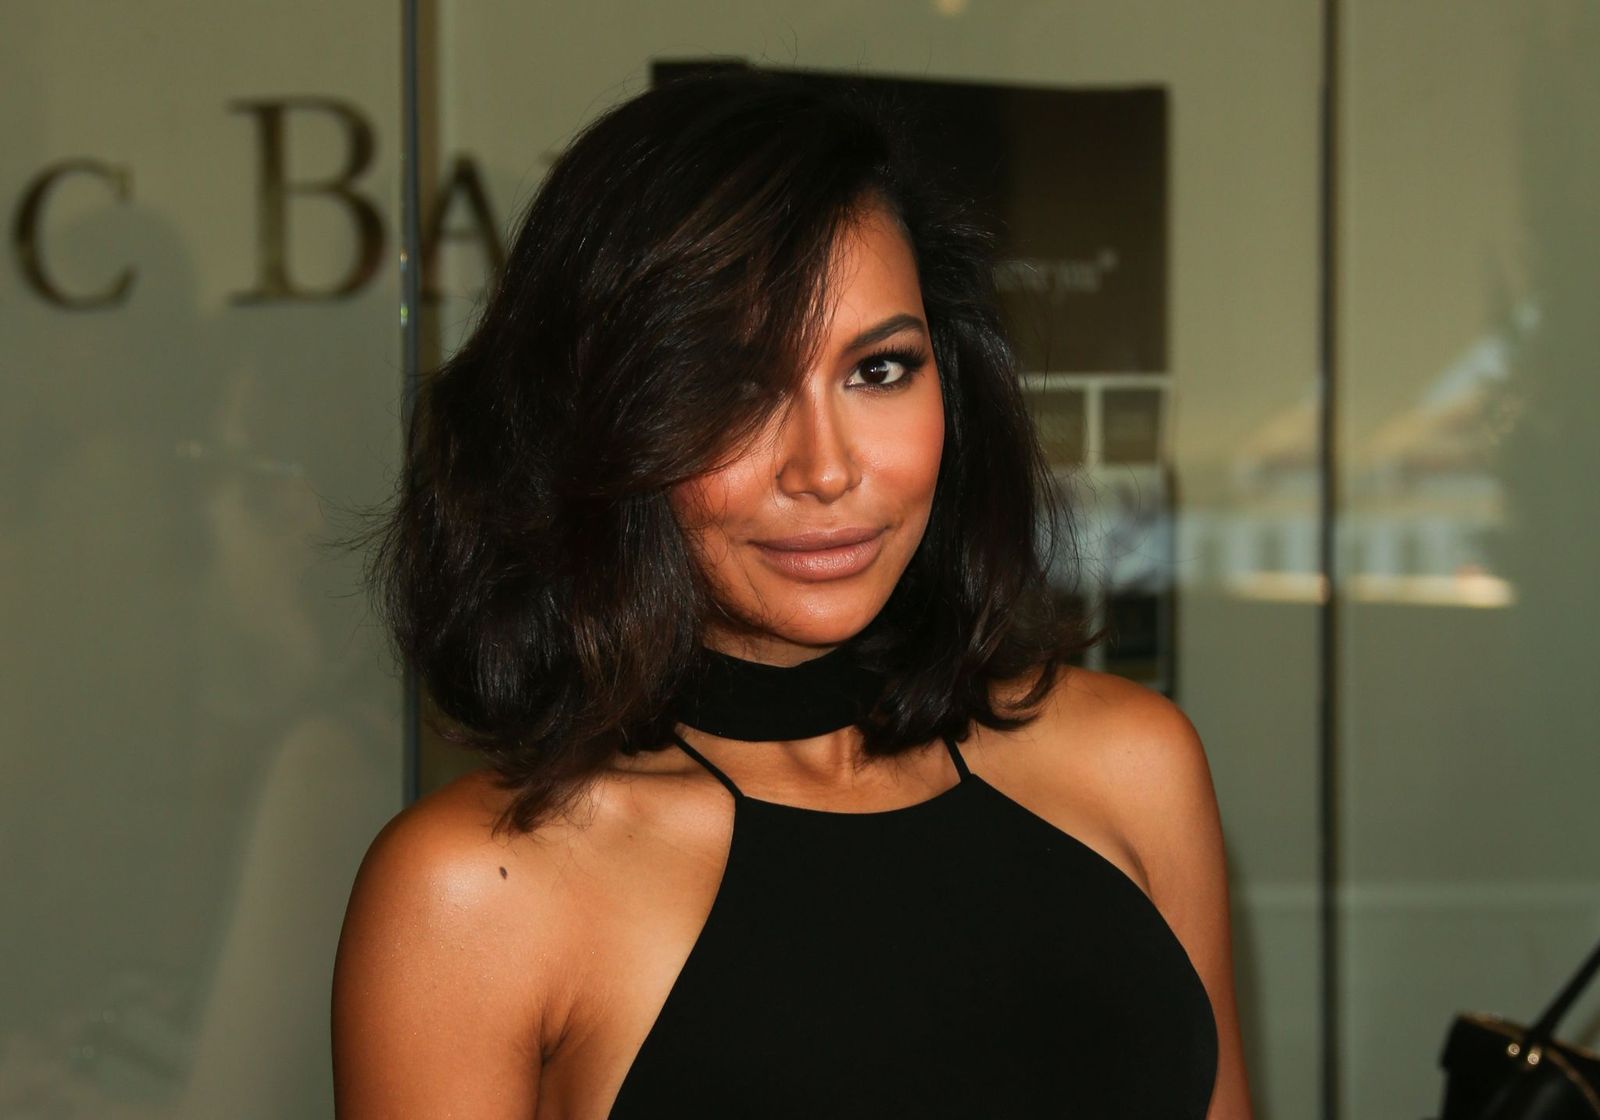 The late Naya Rivera at the "Raising The Bar To End Parkinson's" event at Laurel Point on July 27, 2016 in Studio City, California | Photo: Getty Images